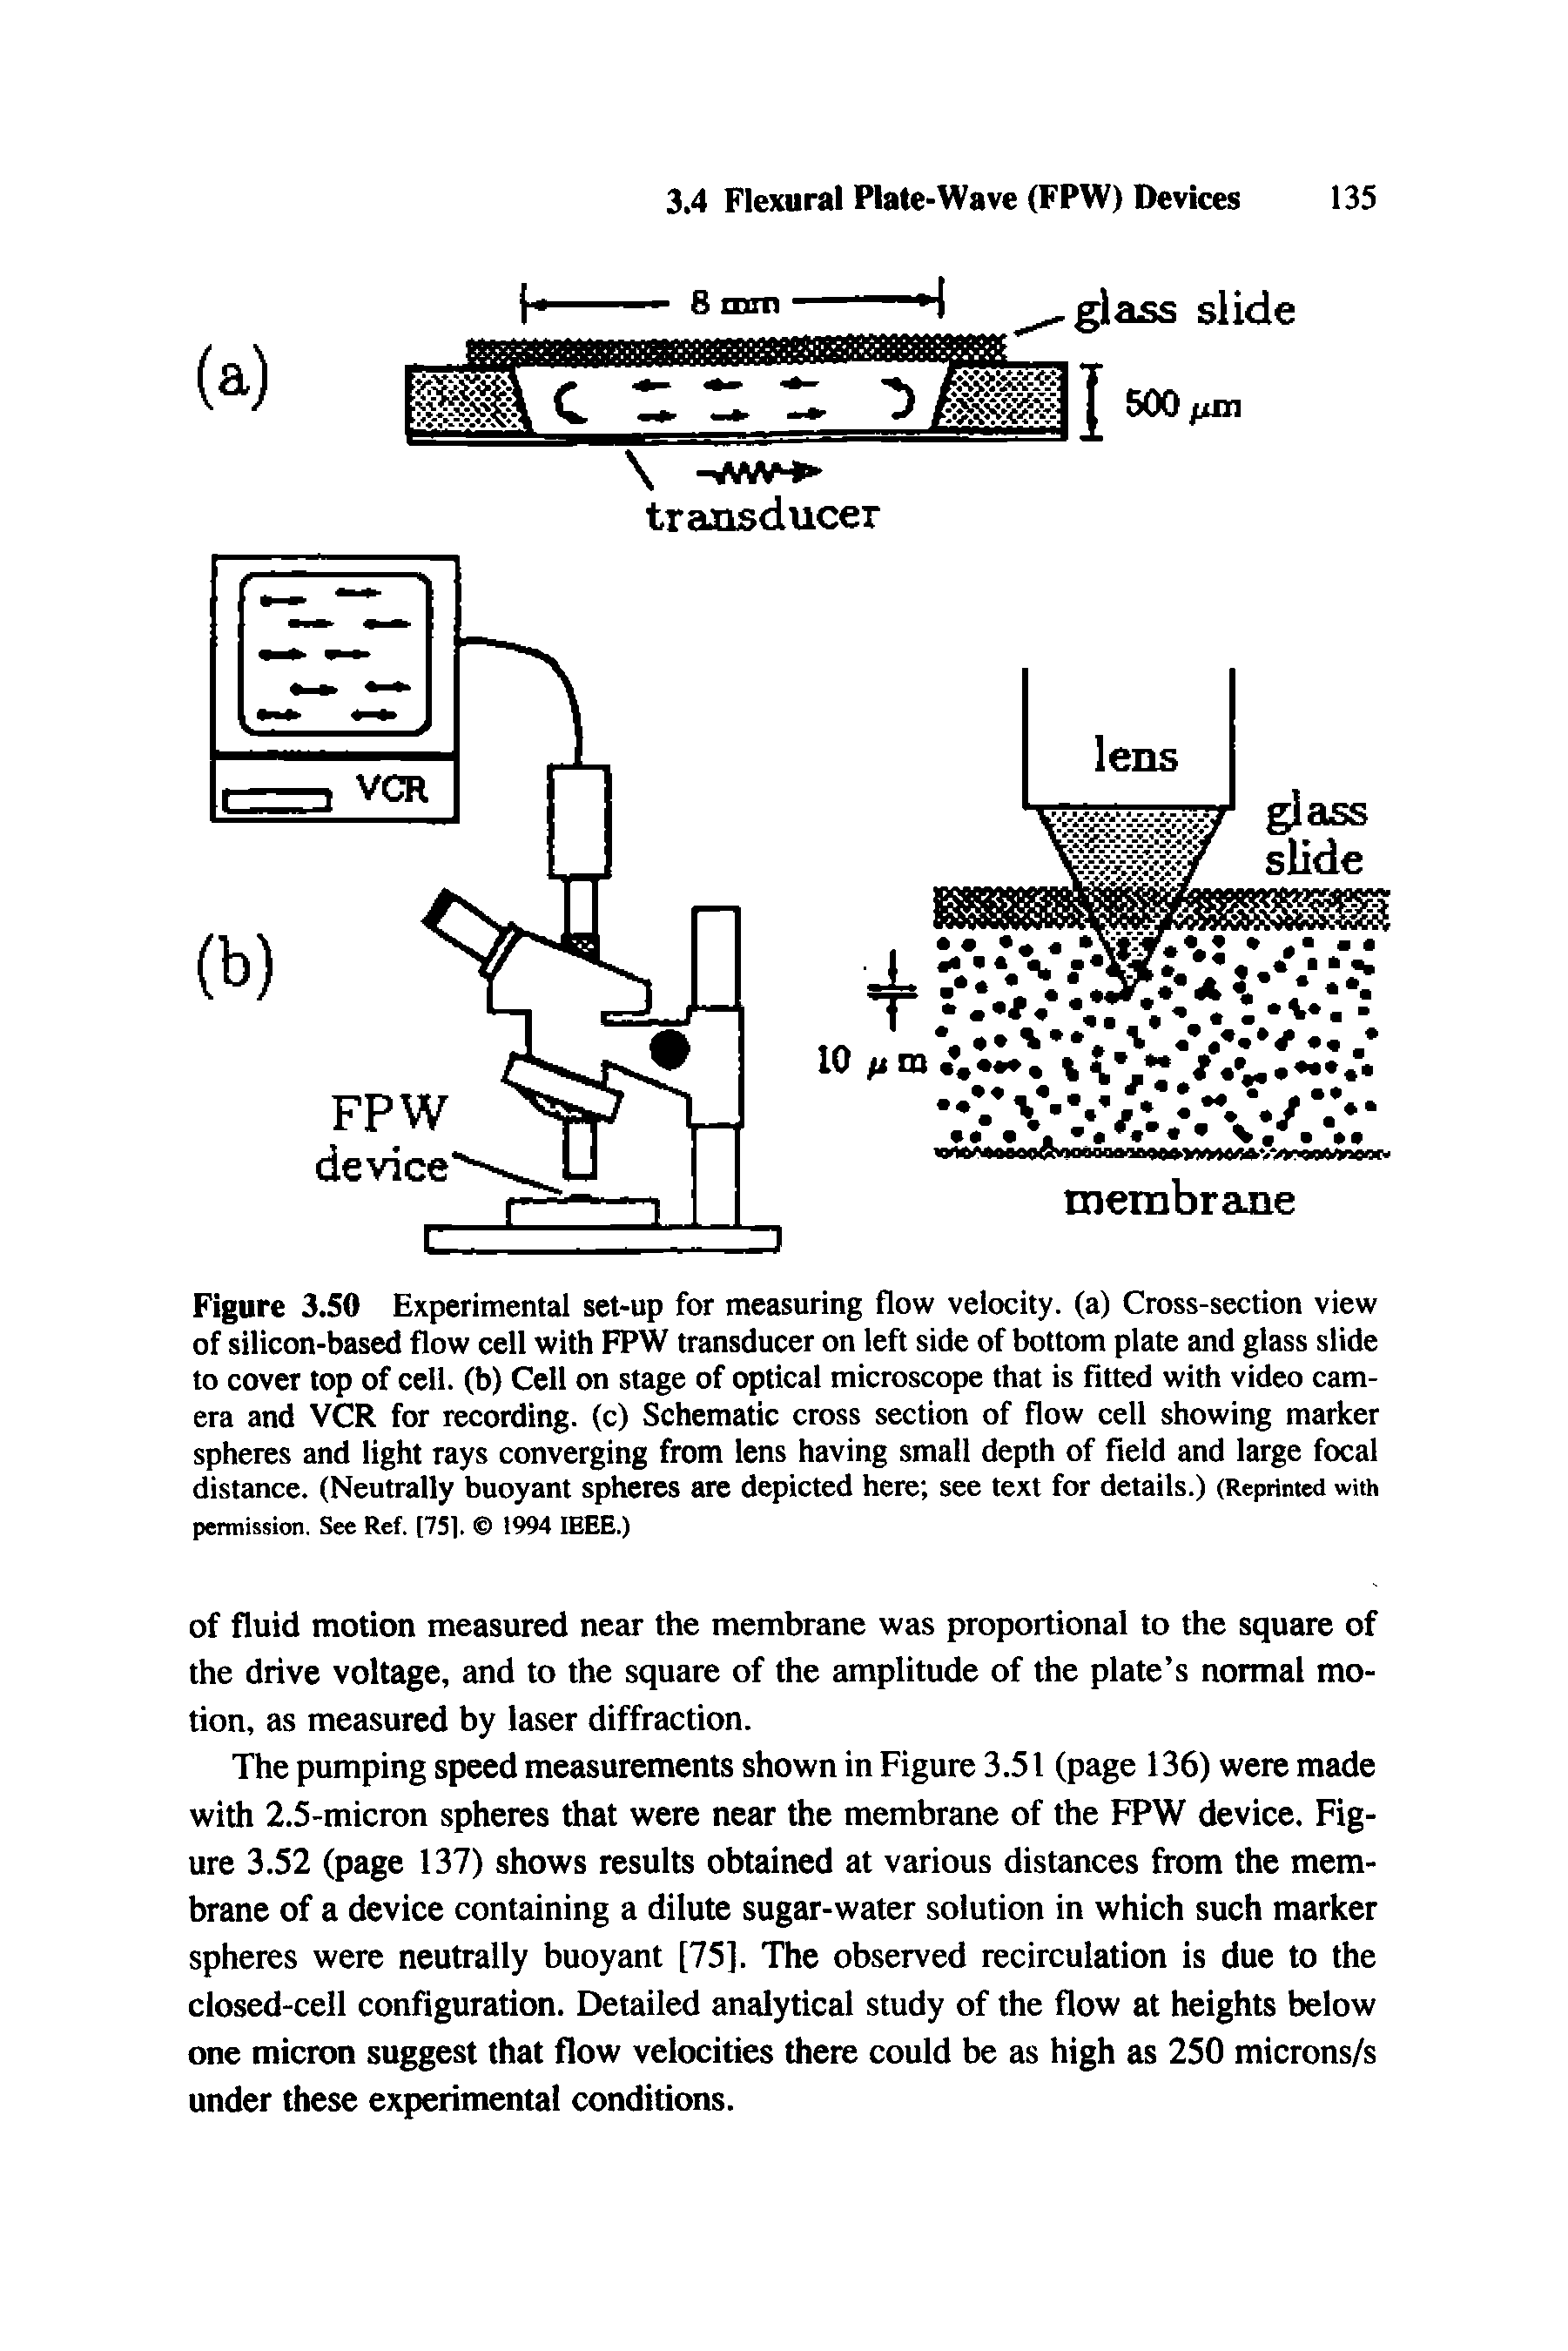 Figure 3.50 Experimental set-up for measuring flow velocity, (a) Cross-section view of silicon-based flow cell with FPW transducer on left side of bottom plate and glass slide to cover top of cell, (b) Cell on stage of optical microscope that is fitted with video camera and VCR for recording, (c) Schematic cross section of flow cell showing marker spheres and light rays converging from lens having small depth of field and large focal distance. (Neutrally buoyant spheres are depicted here see text for details.) (Reprinted with permission. See Ref. [75]. 1994 IEEE.)...